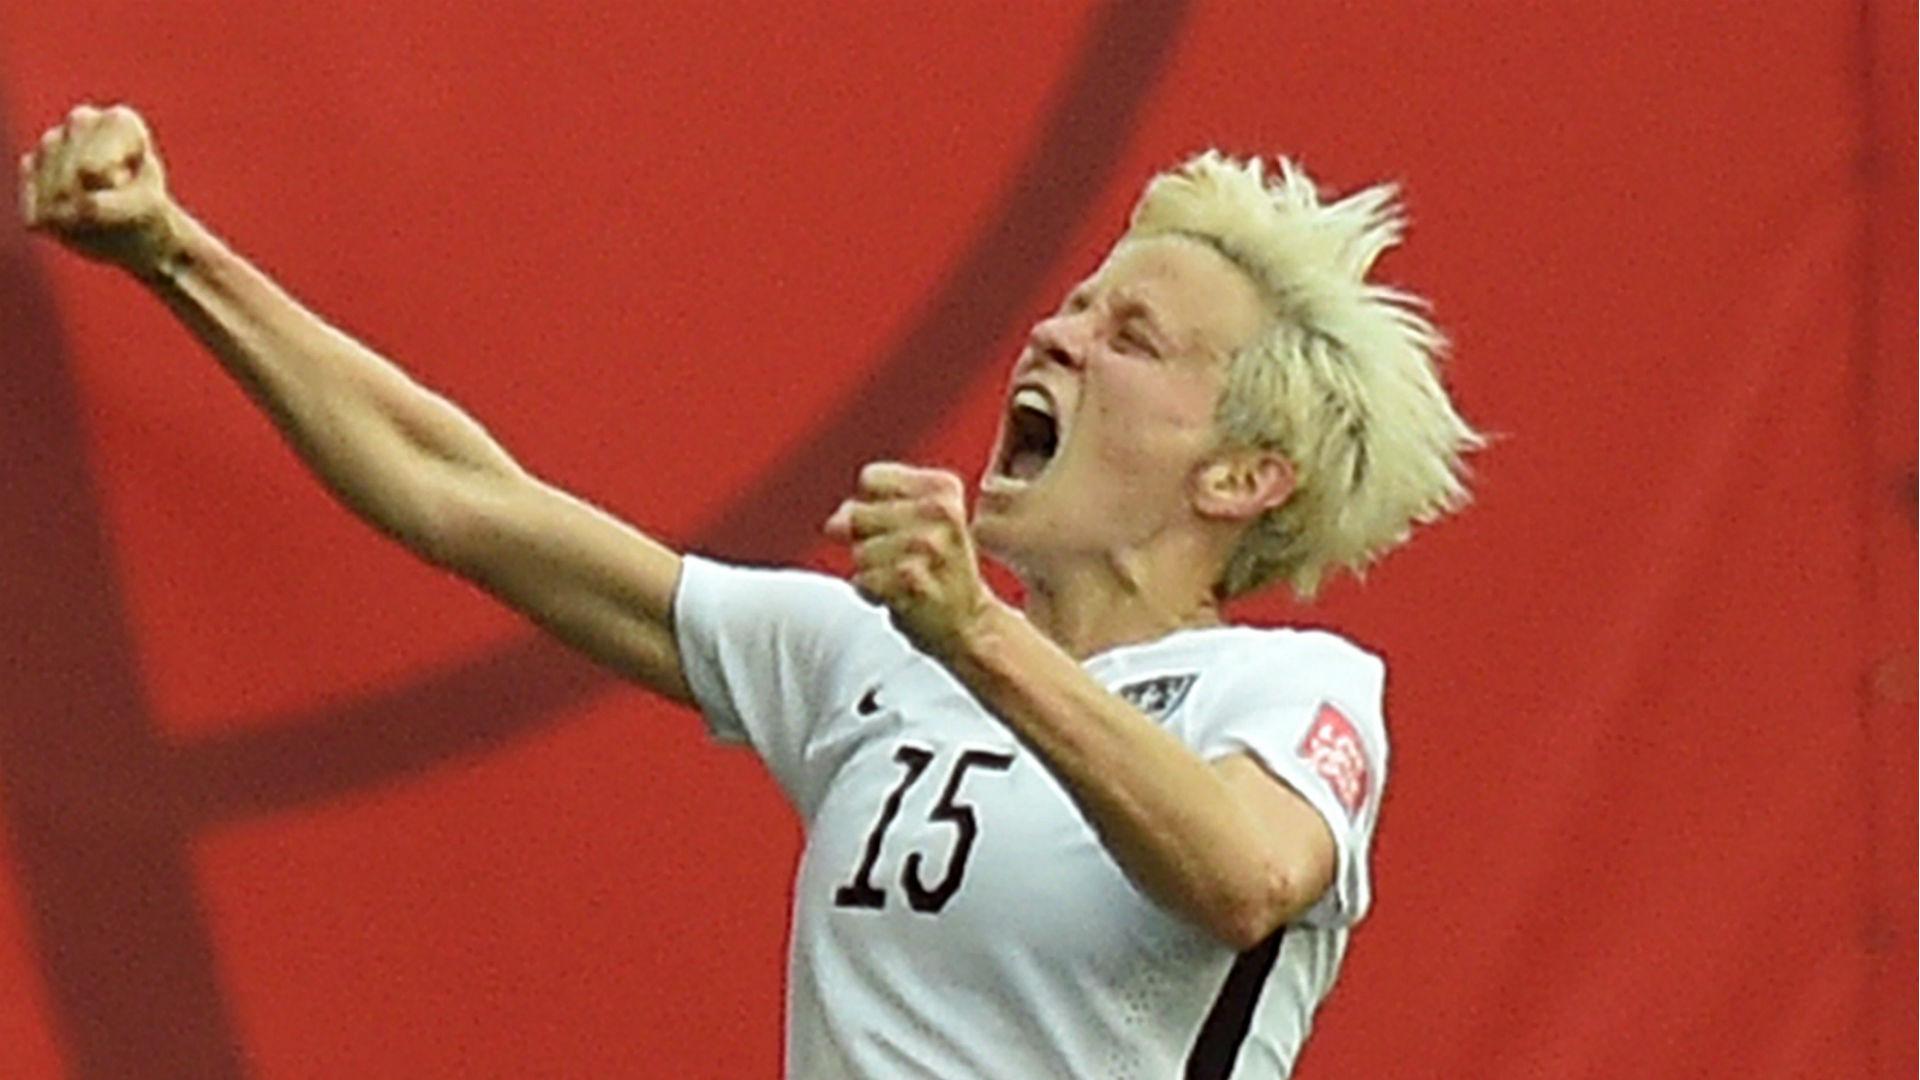 Women's World Cup: Rapinoe not impressed by Blatter mindset. Other